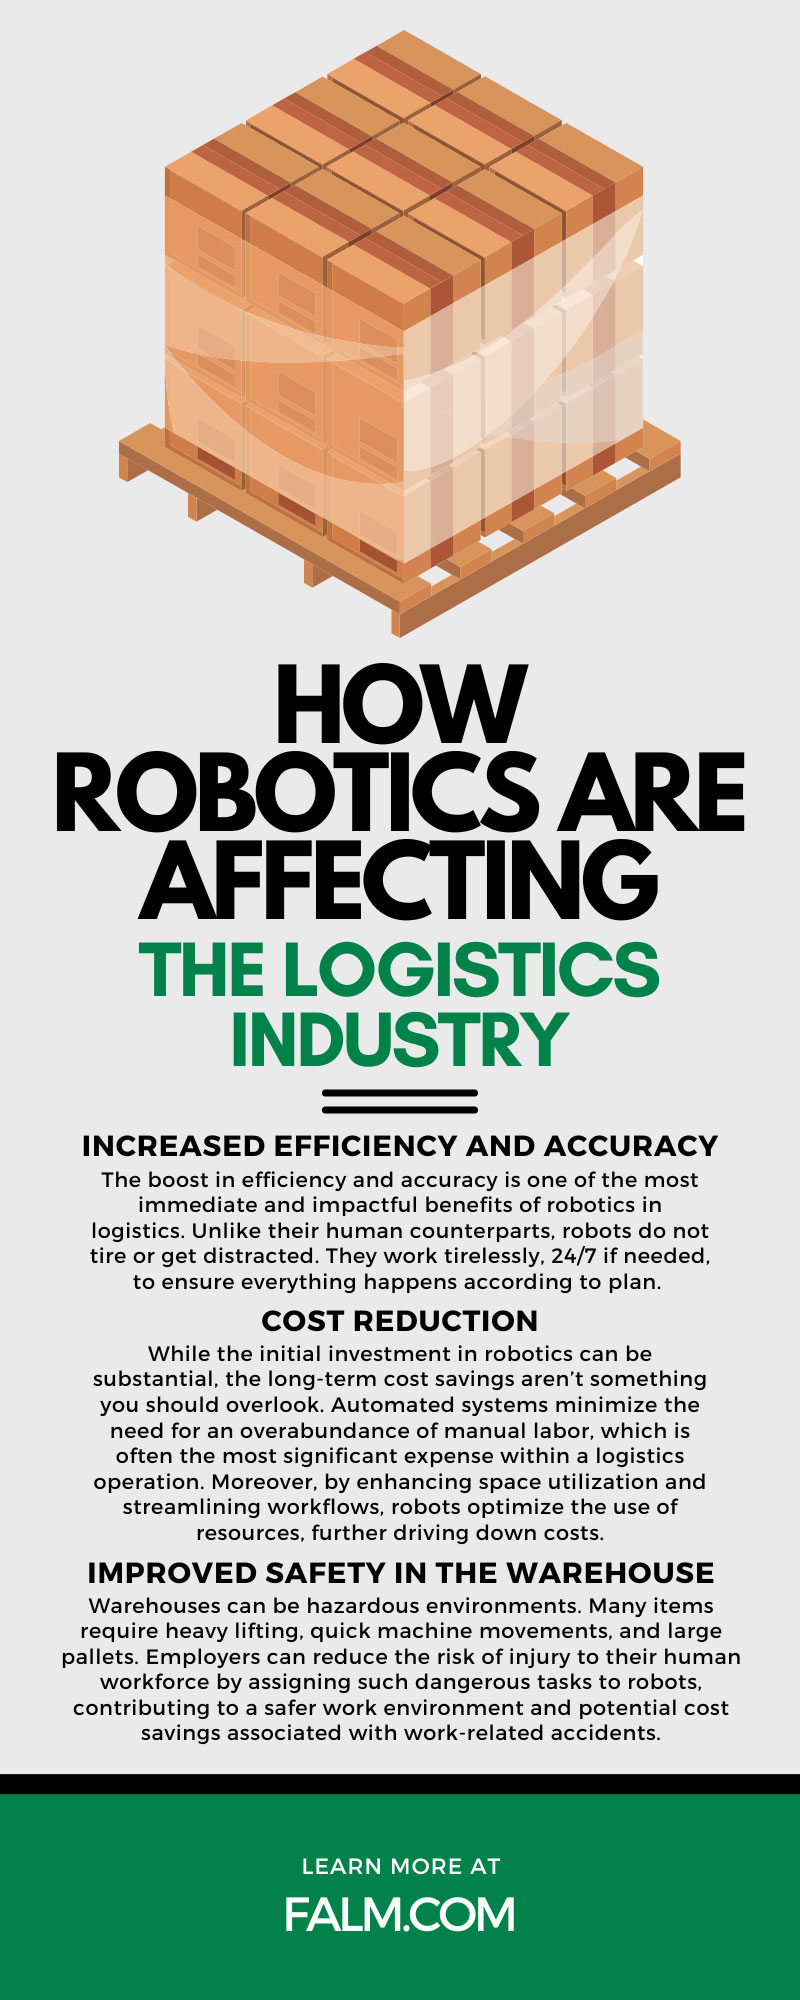 How Robotics Are Affecting the Logistics Industry
